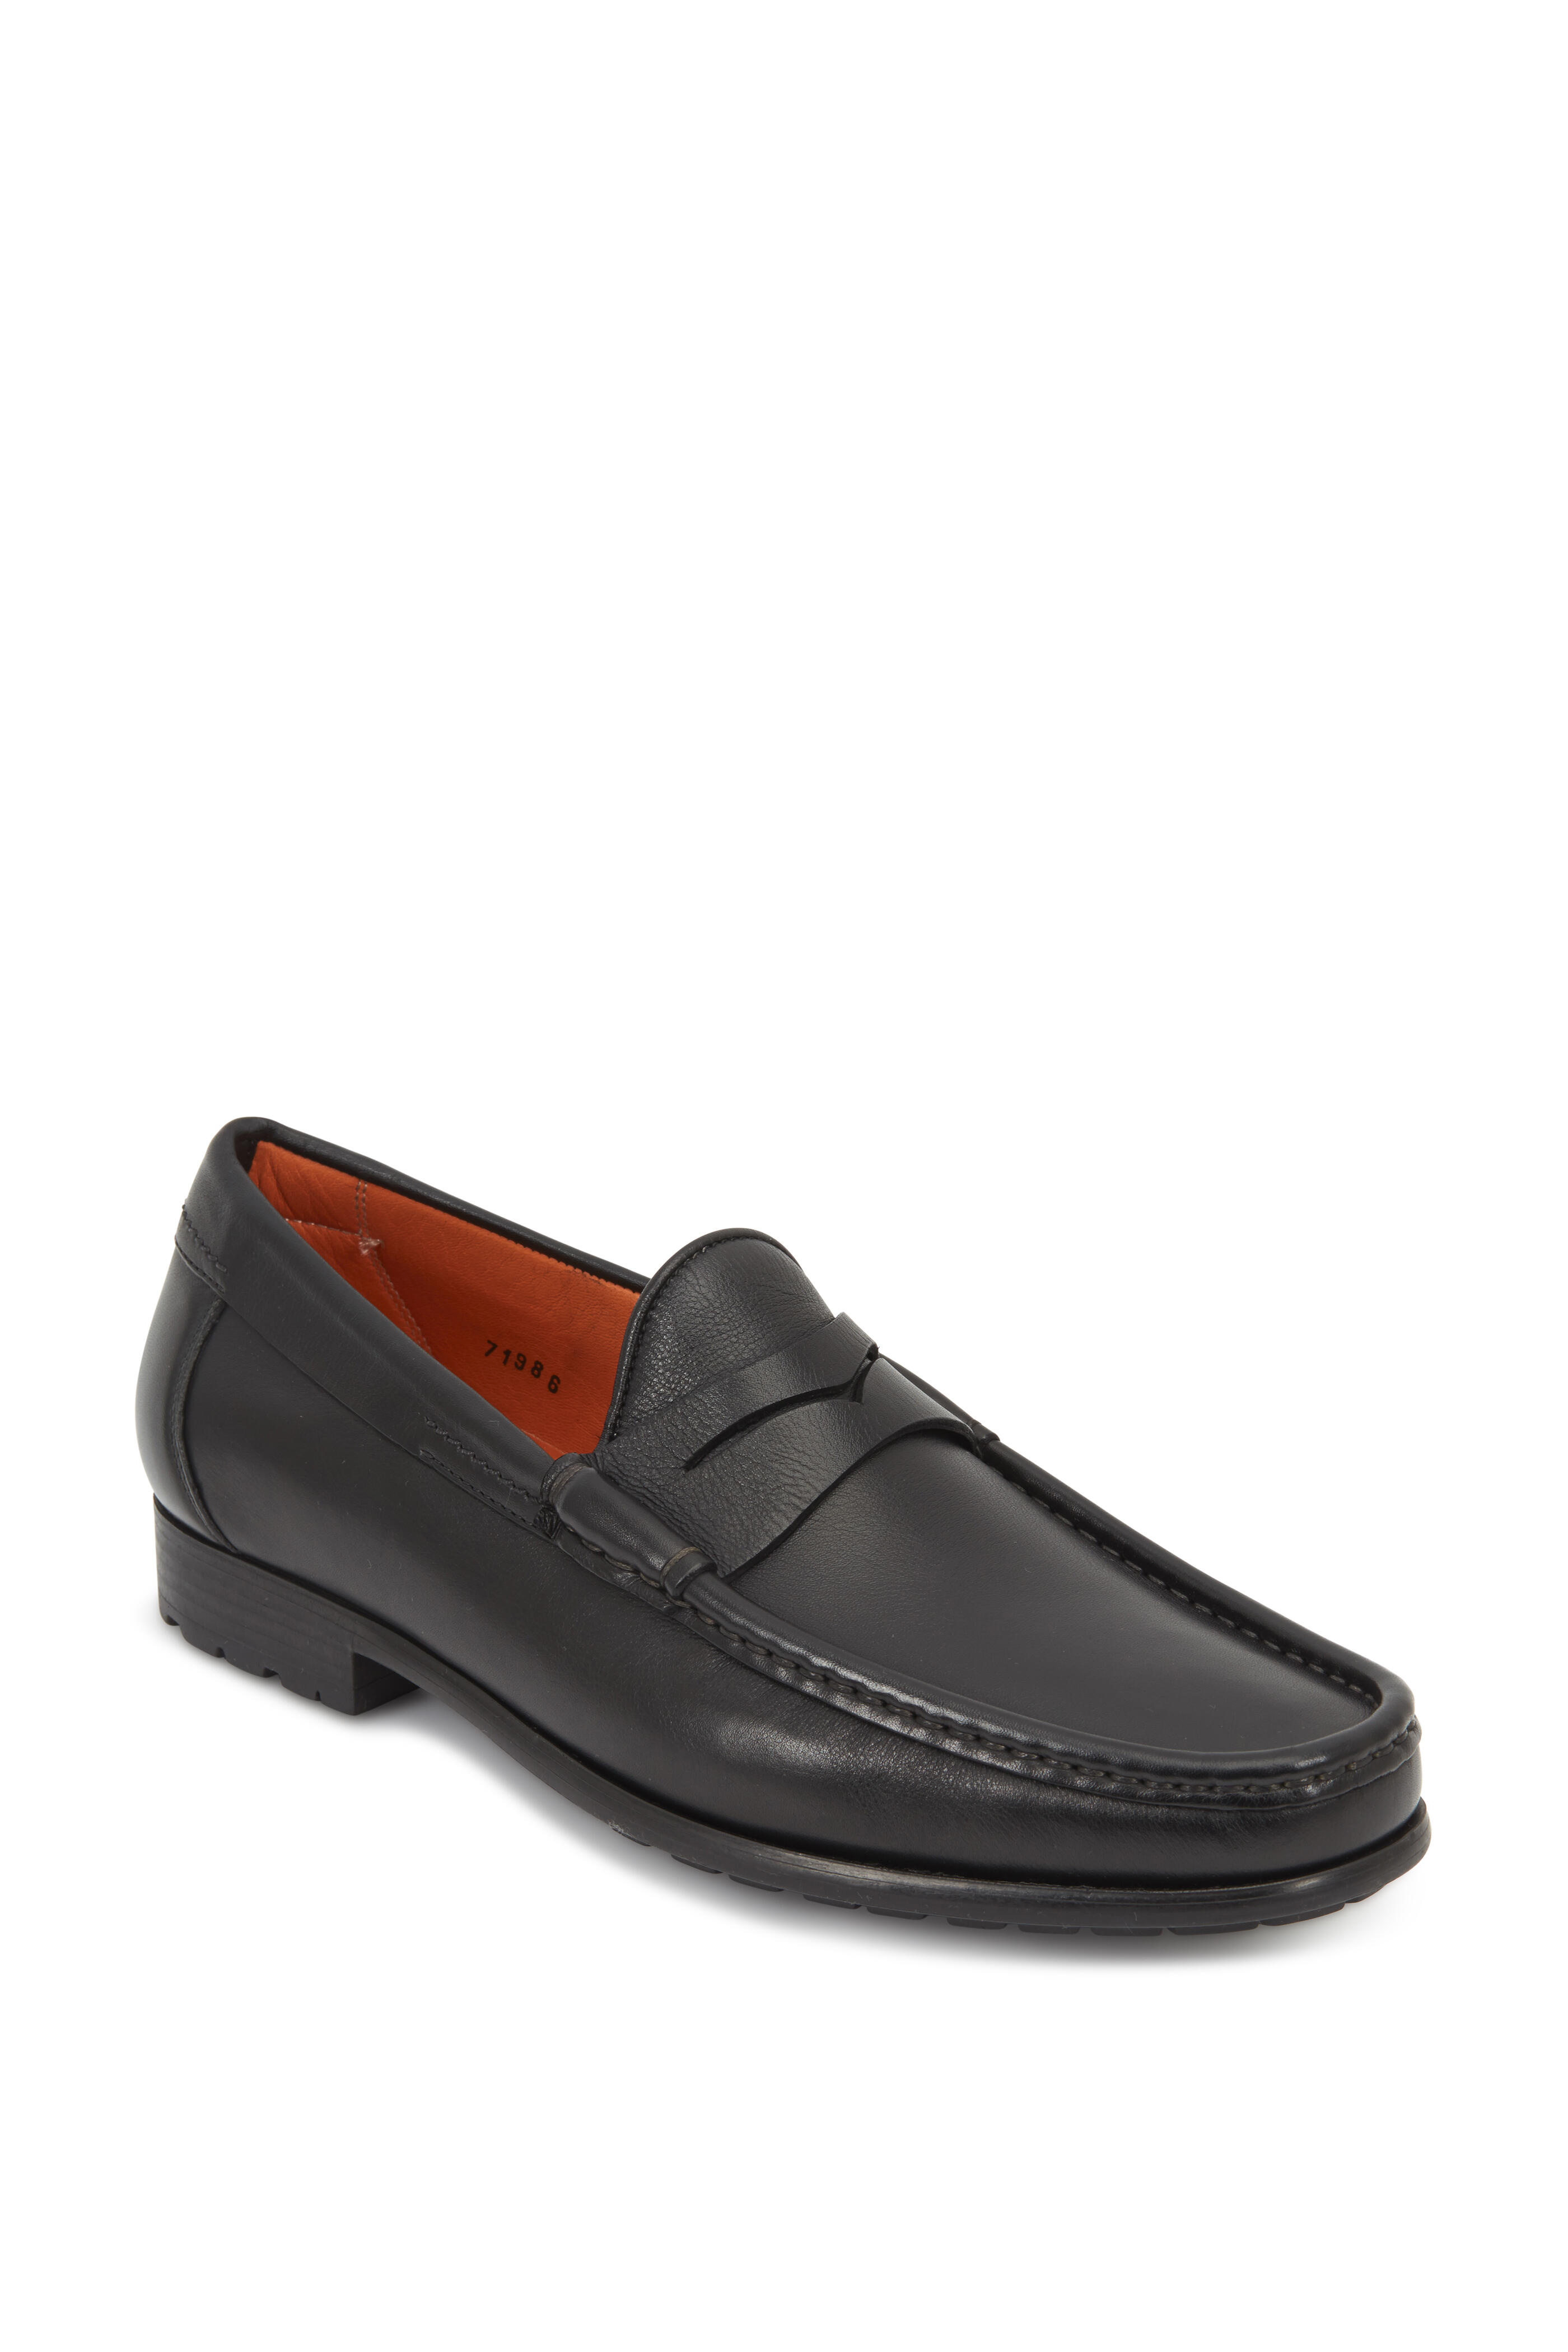 schot lied Specificiteit Santoni - Ascott Black Leather Penny Loafer | Mitchell Stores